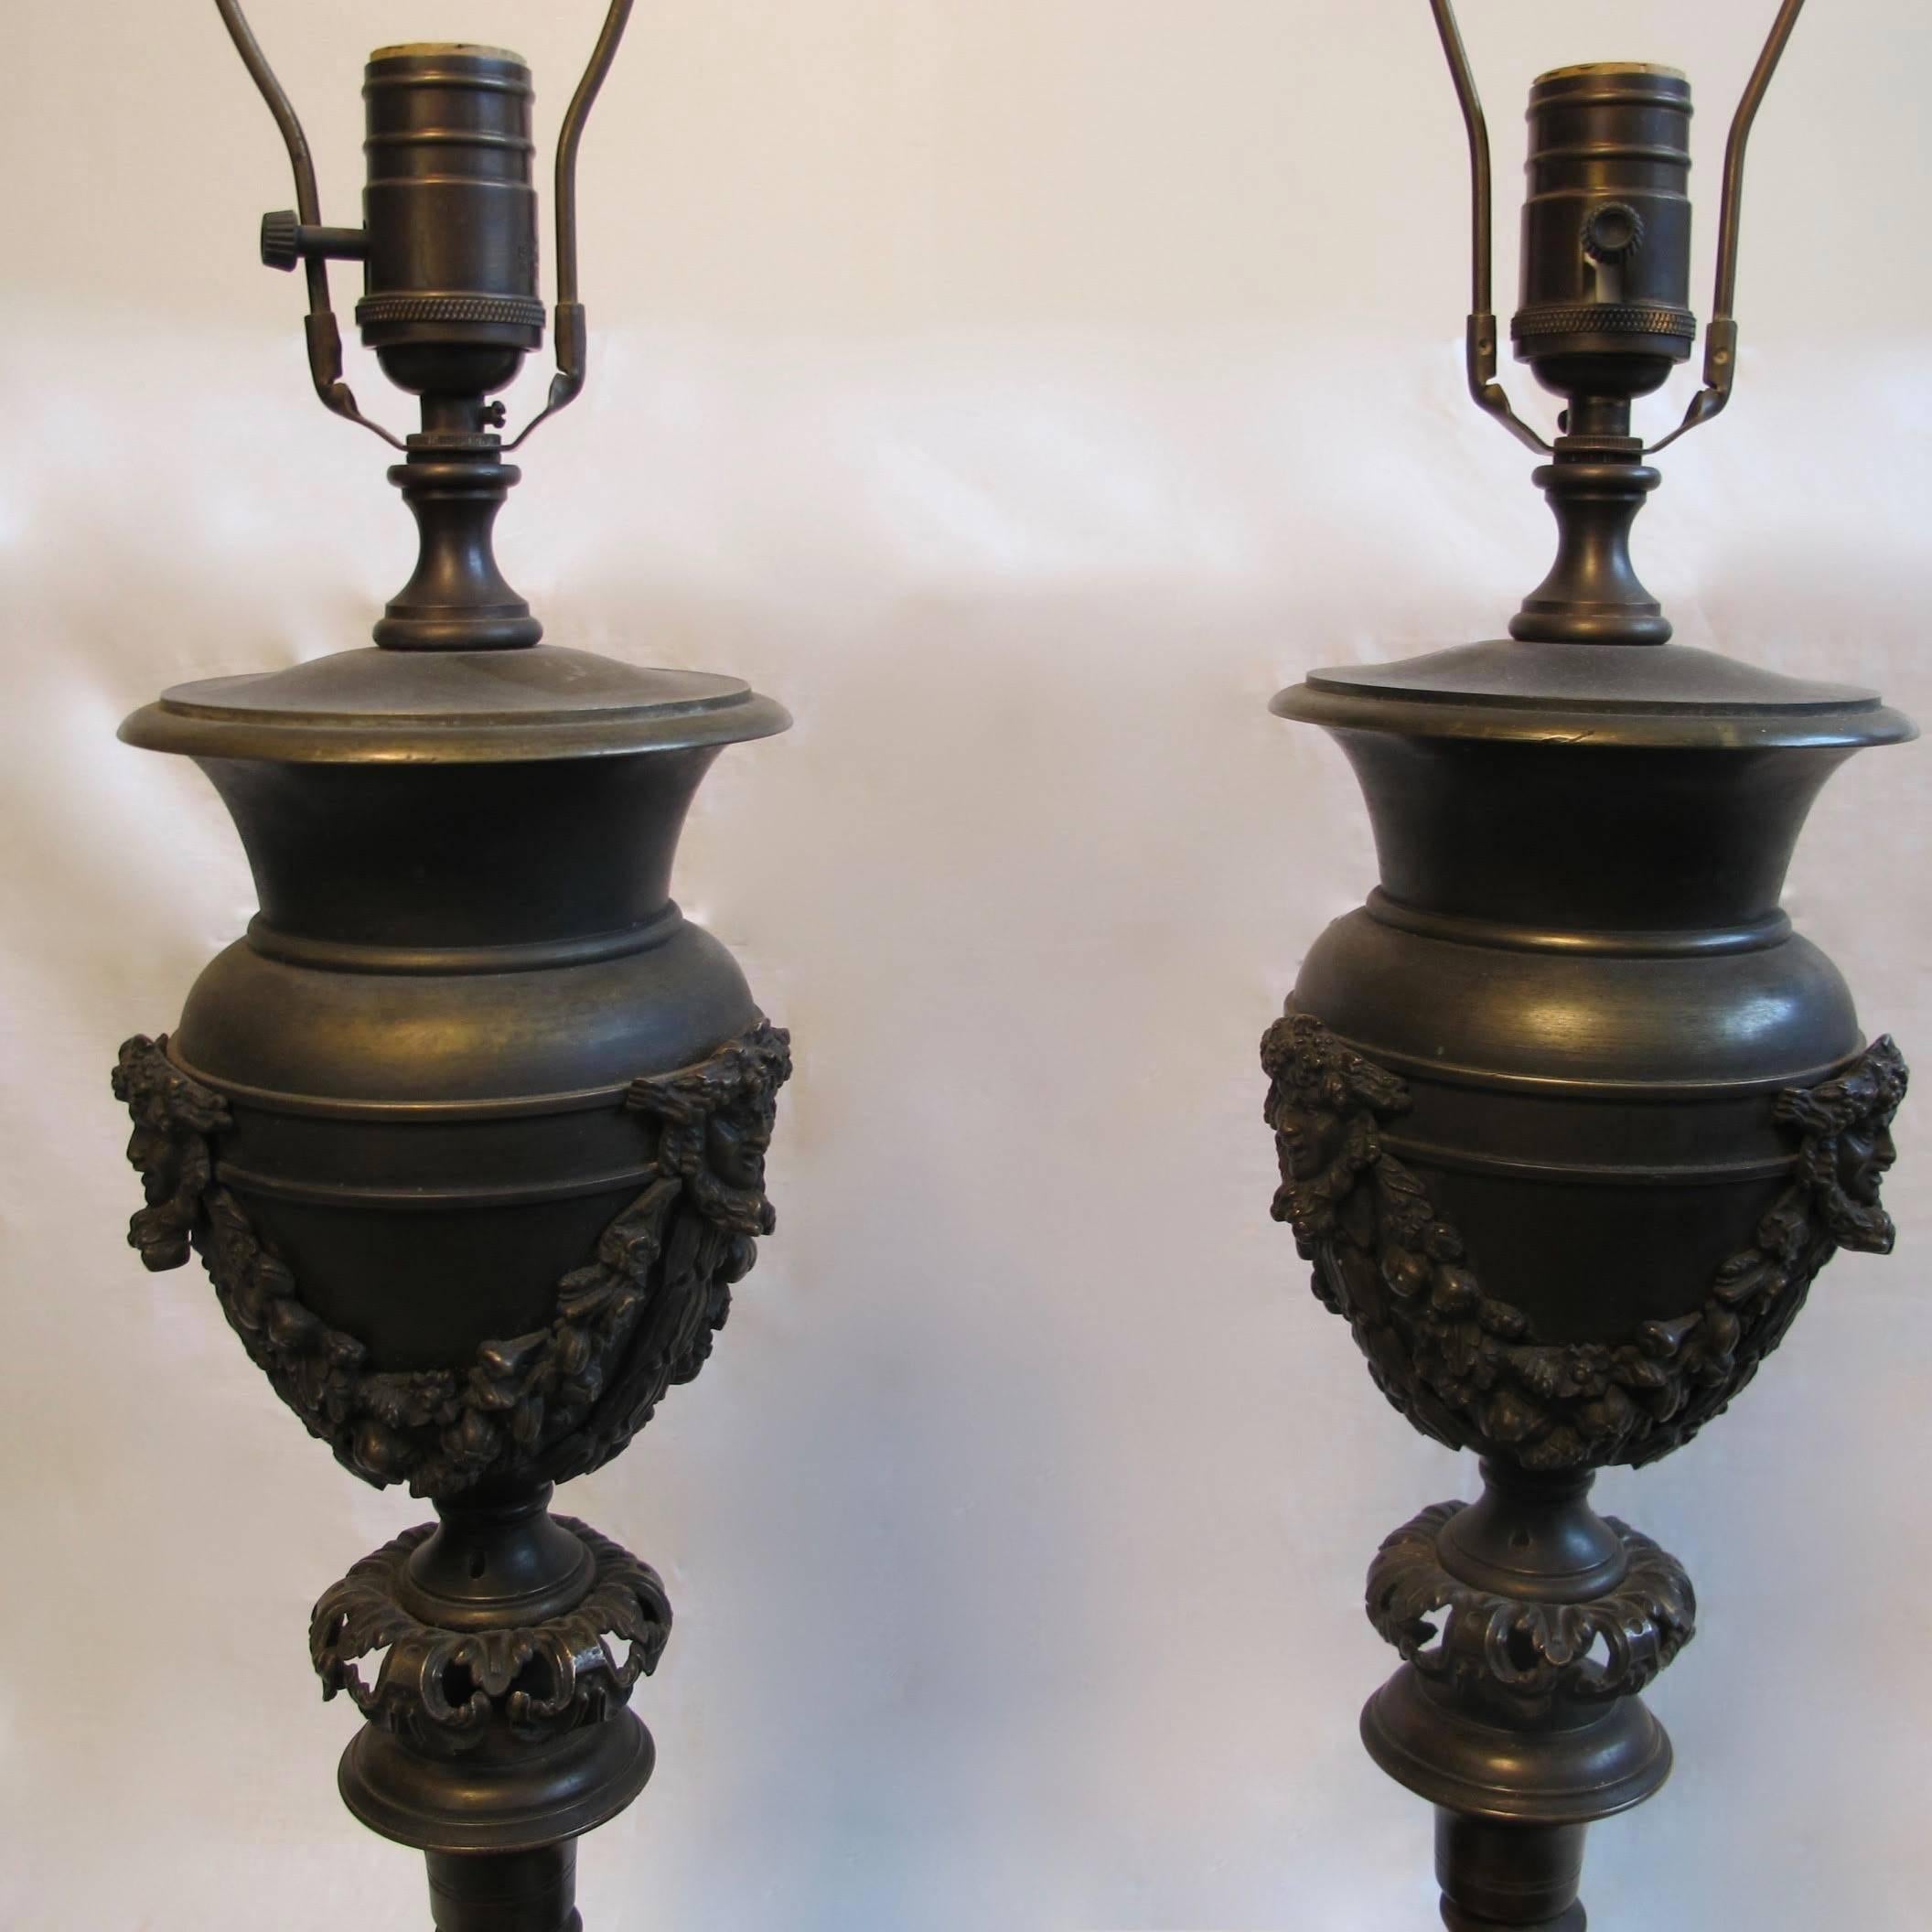 Pair of 19th Century European Bronze Newel Post Urn Lamps For Sale 3